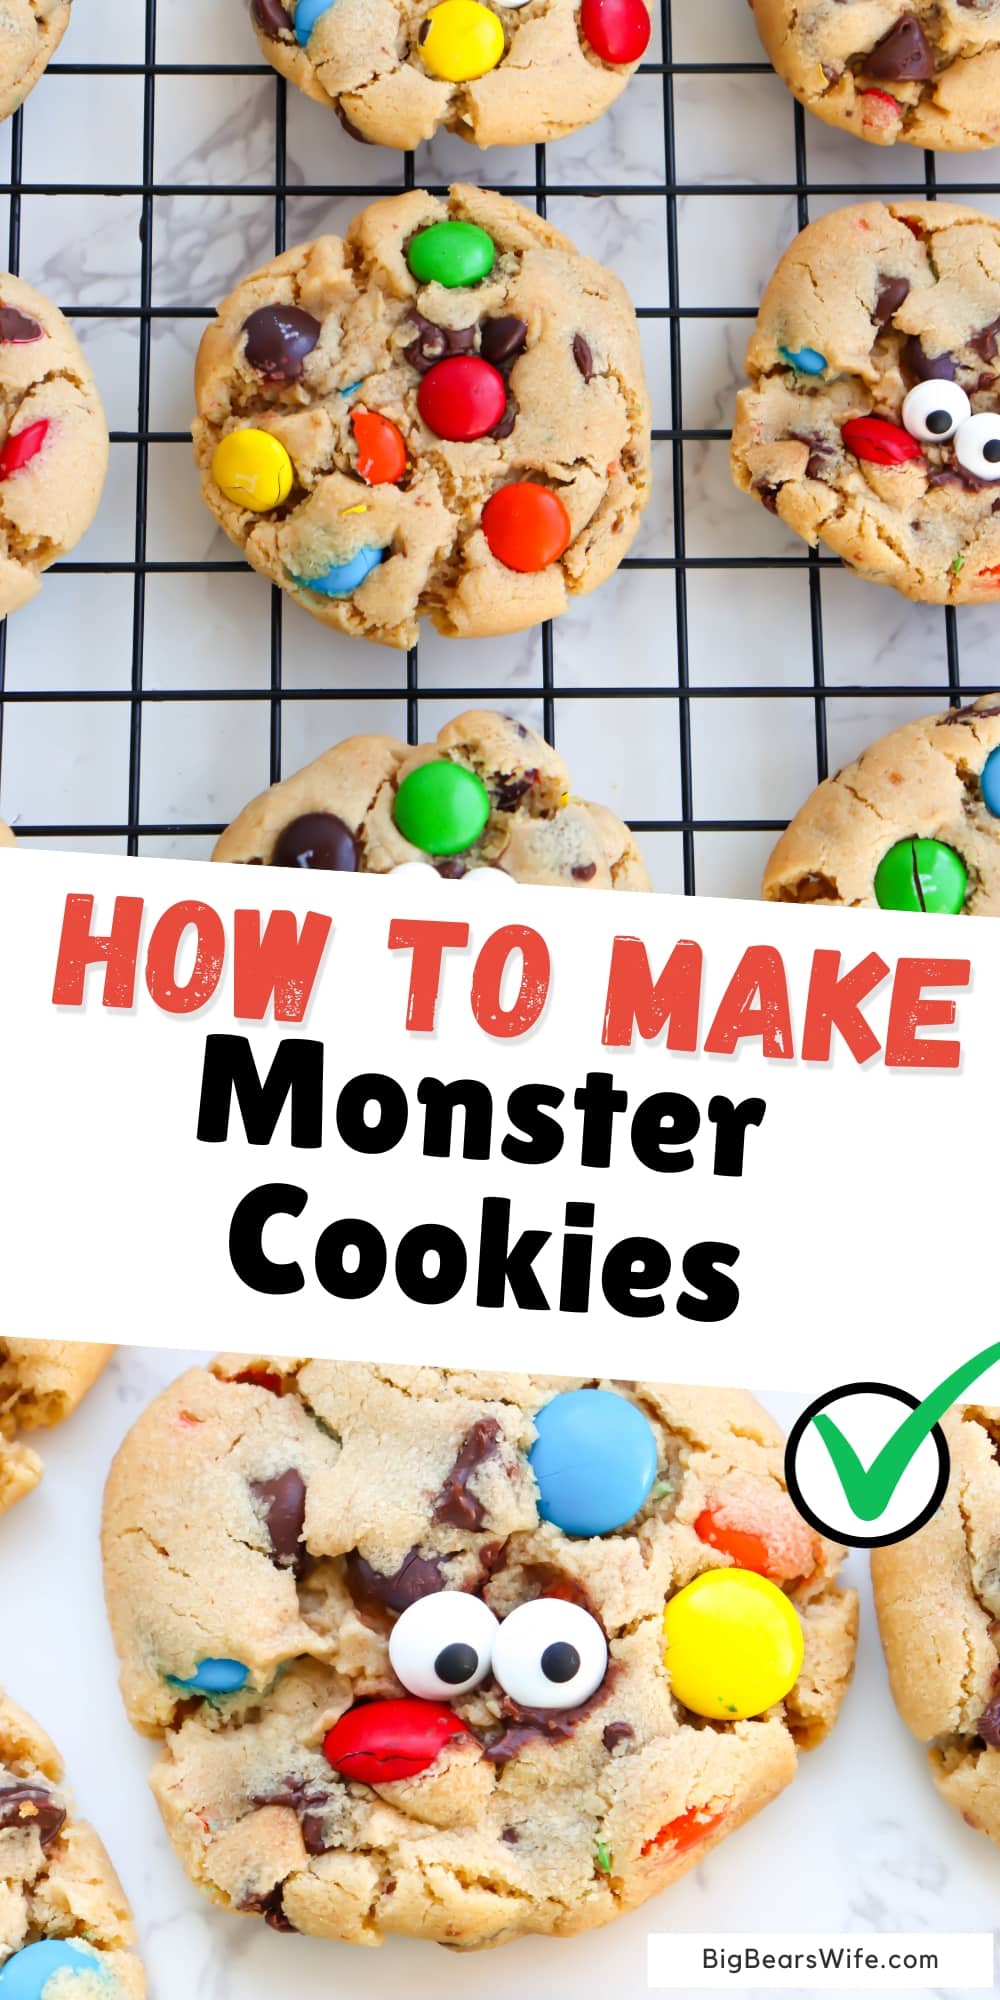 These Monster Cookies are peanut butter cookies, stuffed with chocolate chips and M&MS candies with the occasional candy eye for decoration!  via @bigbearswife